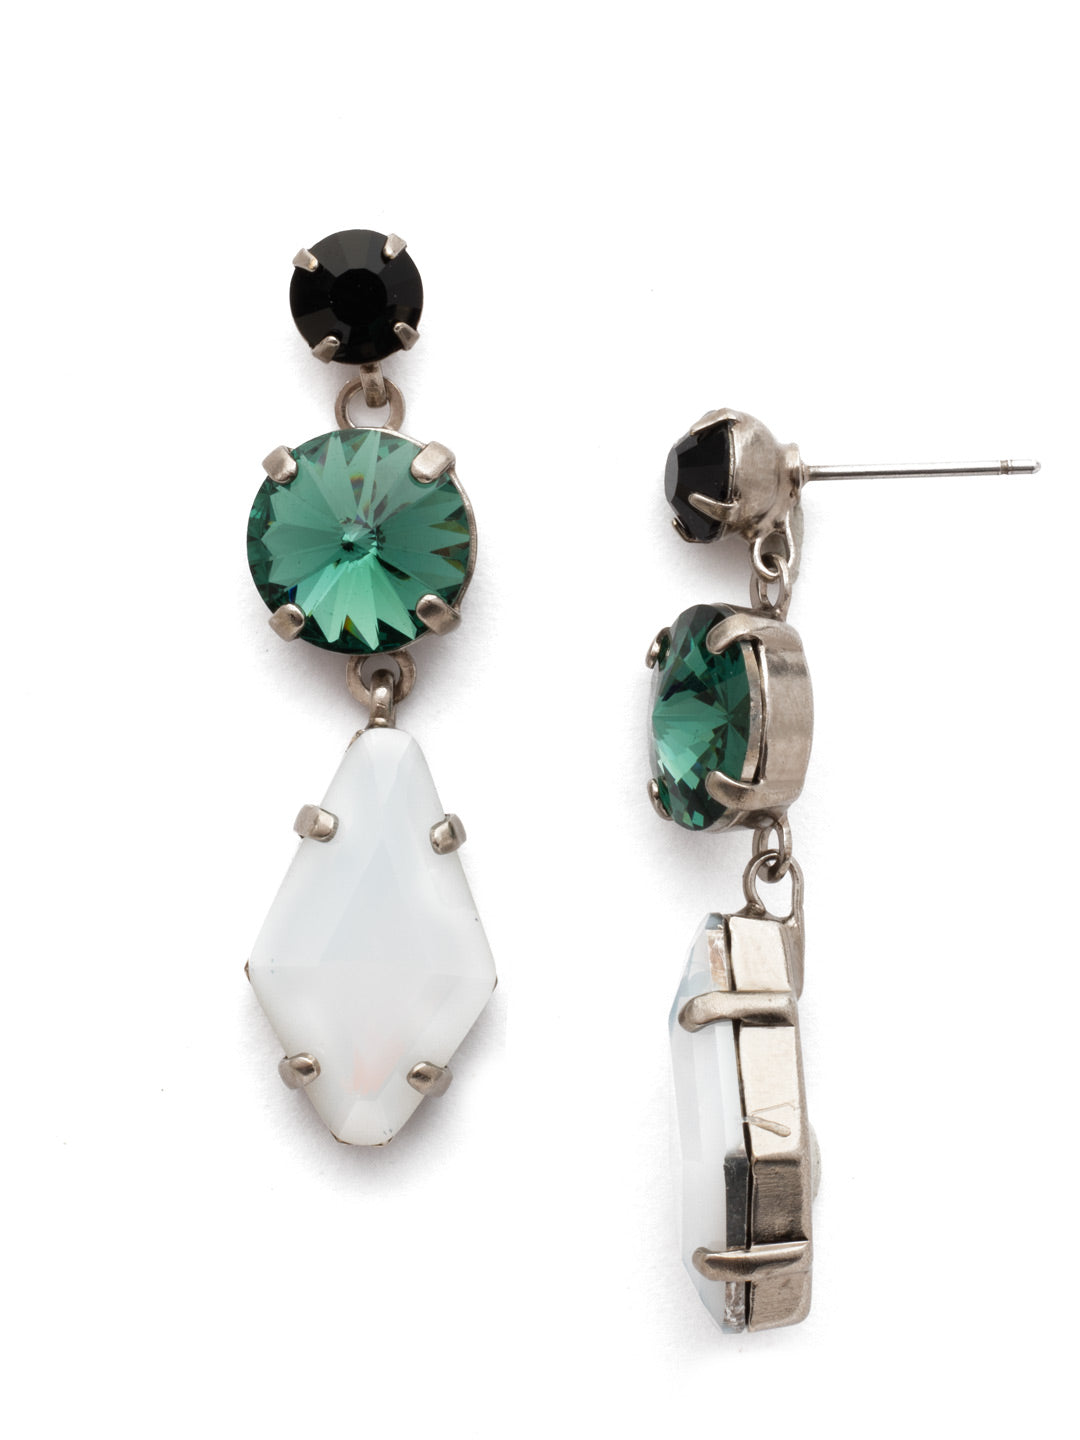 Rhombus Roundabout Dangle Earrings - EDK58ASGDG - One petite round crystal sits above a larger rounded crystal accompanied by a diamond shaped crystal hanging below in this simply stated french wire earring.